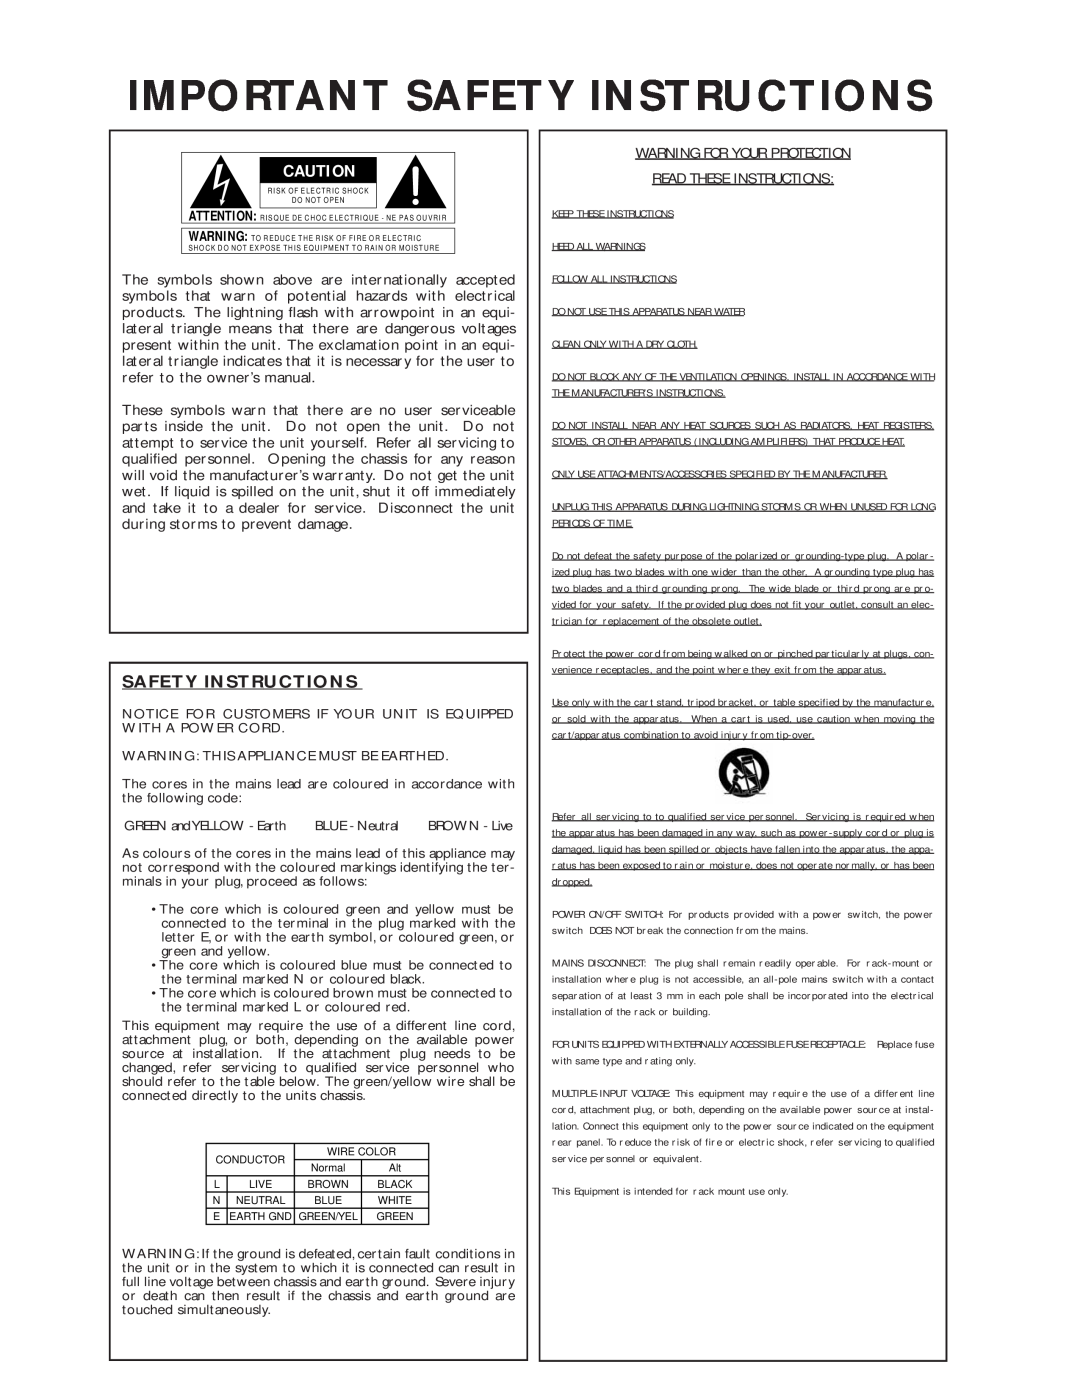 dbx Pro 266XL manuel dutilisation Important Safety Instructions, Warning For Your Protection Read These Instructions 